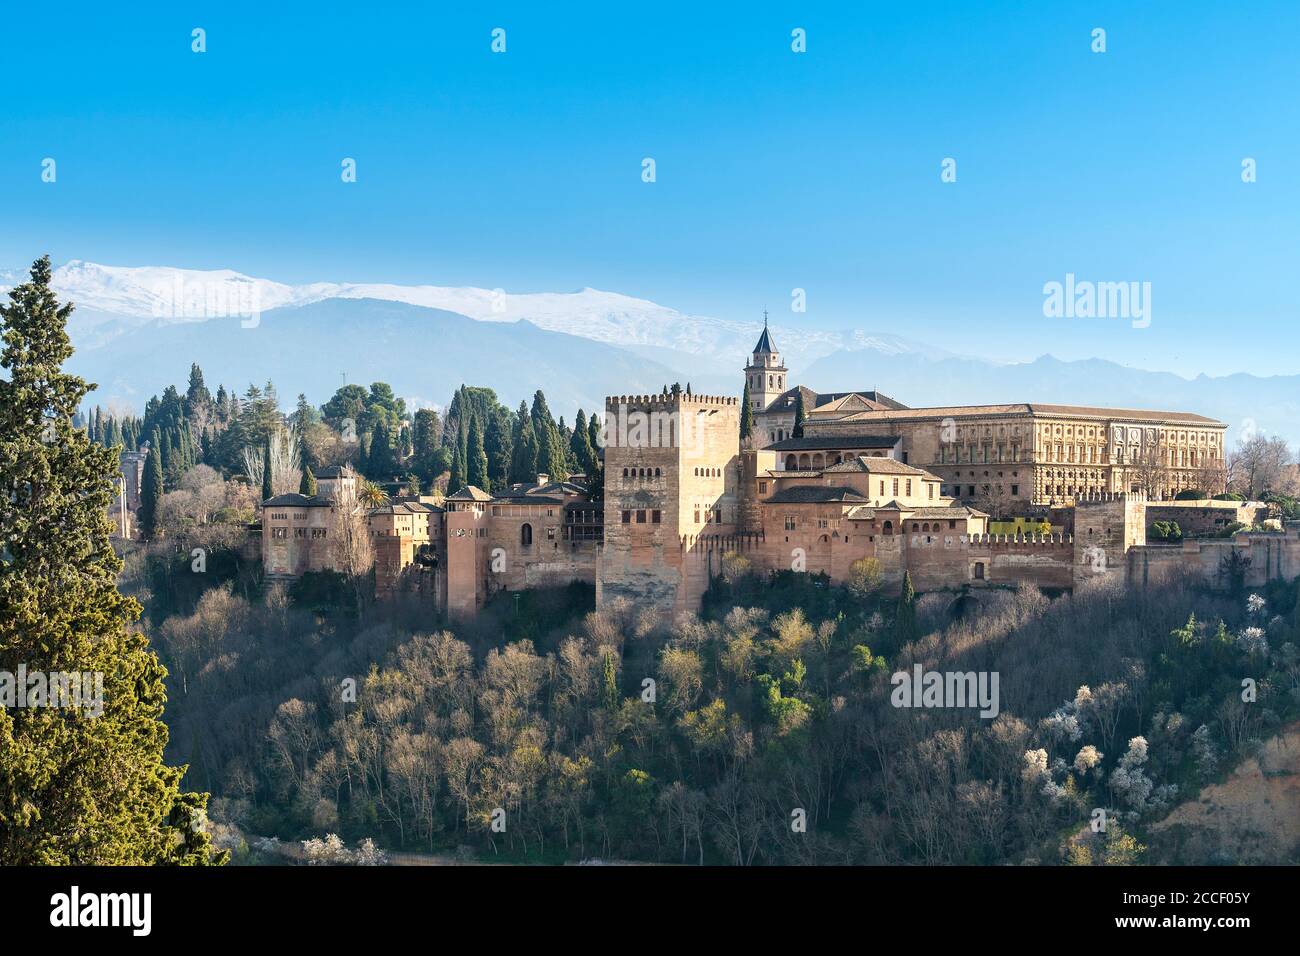 Granada (Spain), view of the Alhambra, in the background Sierra Nevada with snow-capped mountains Stock Photo